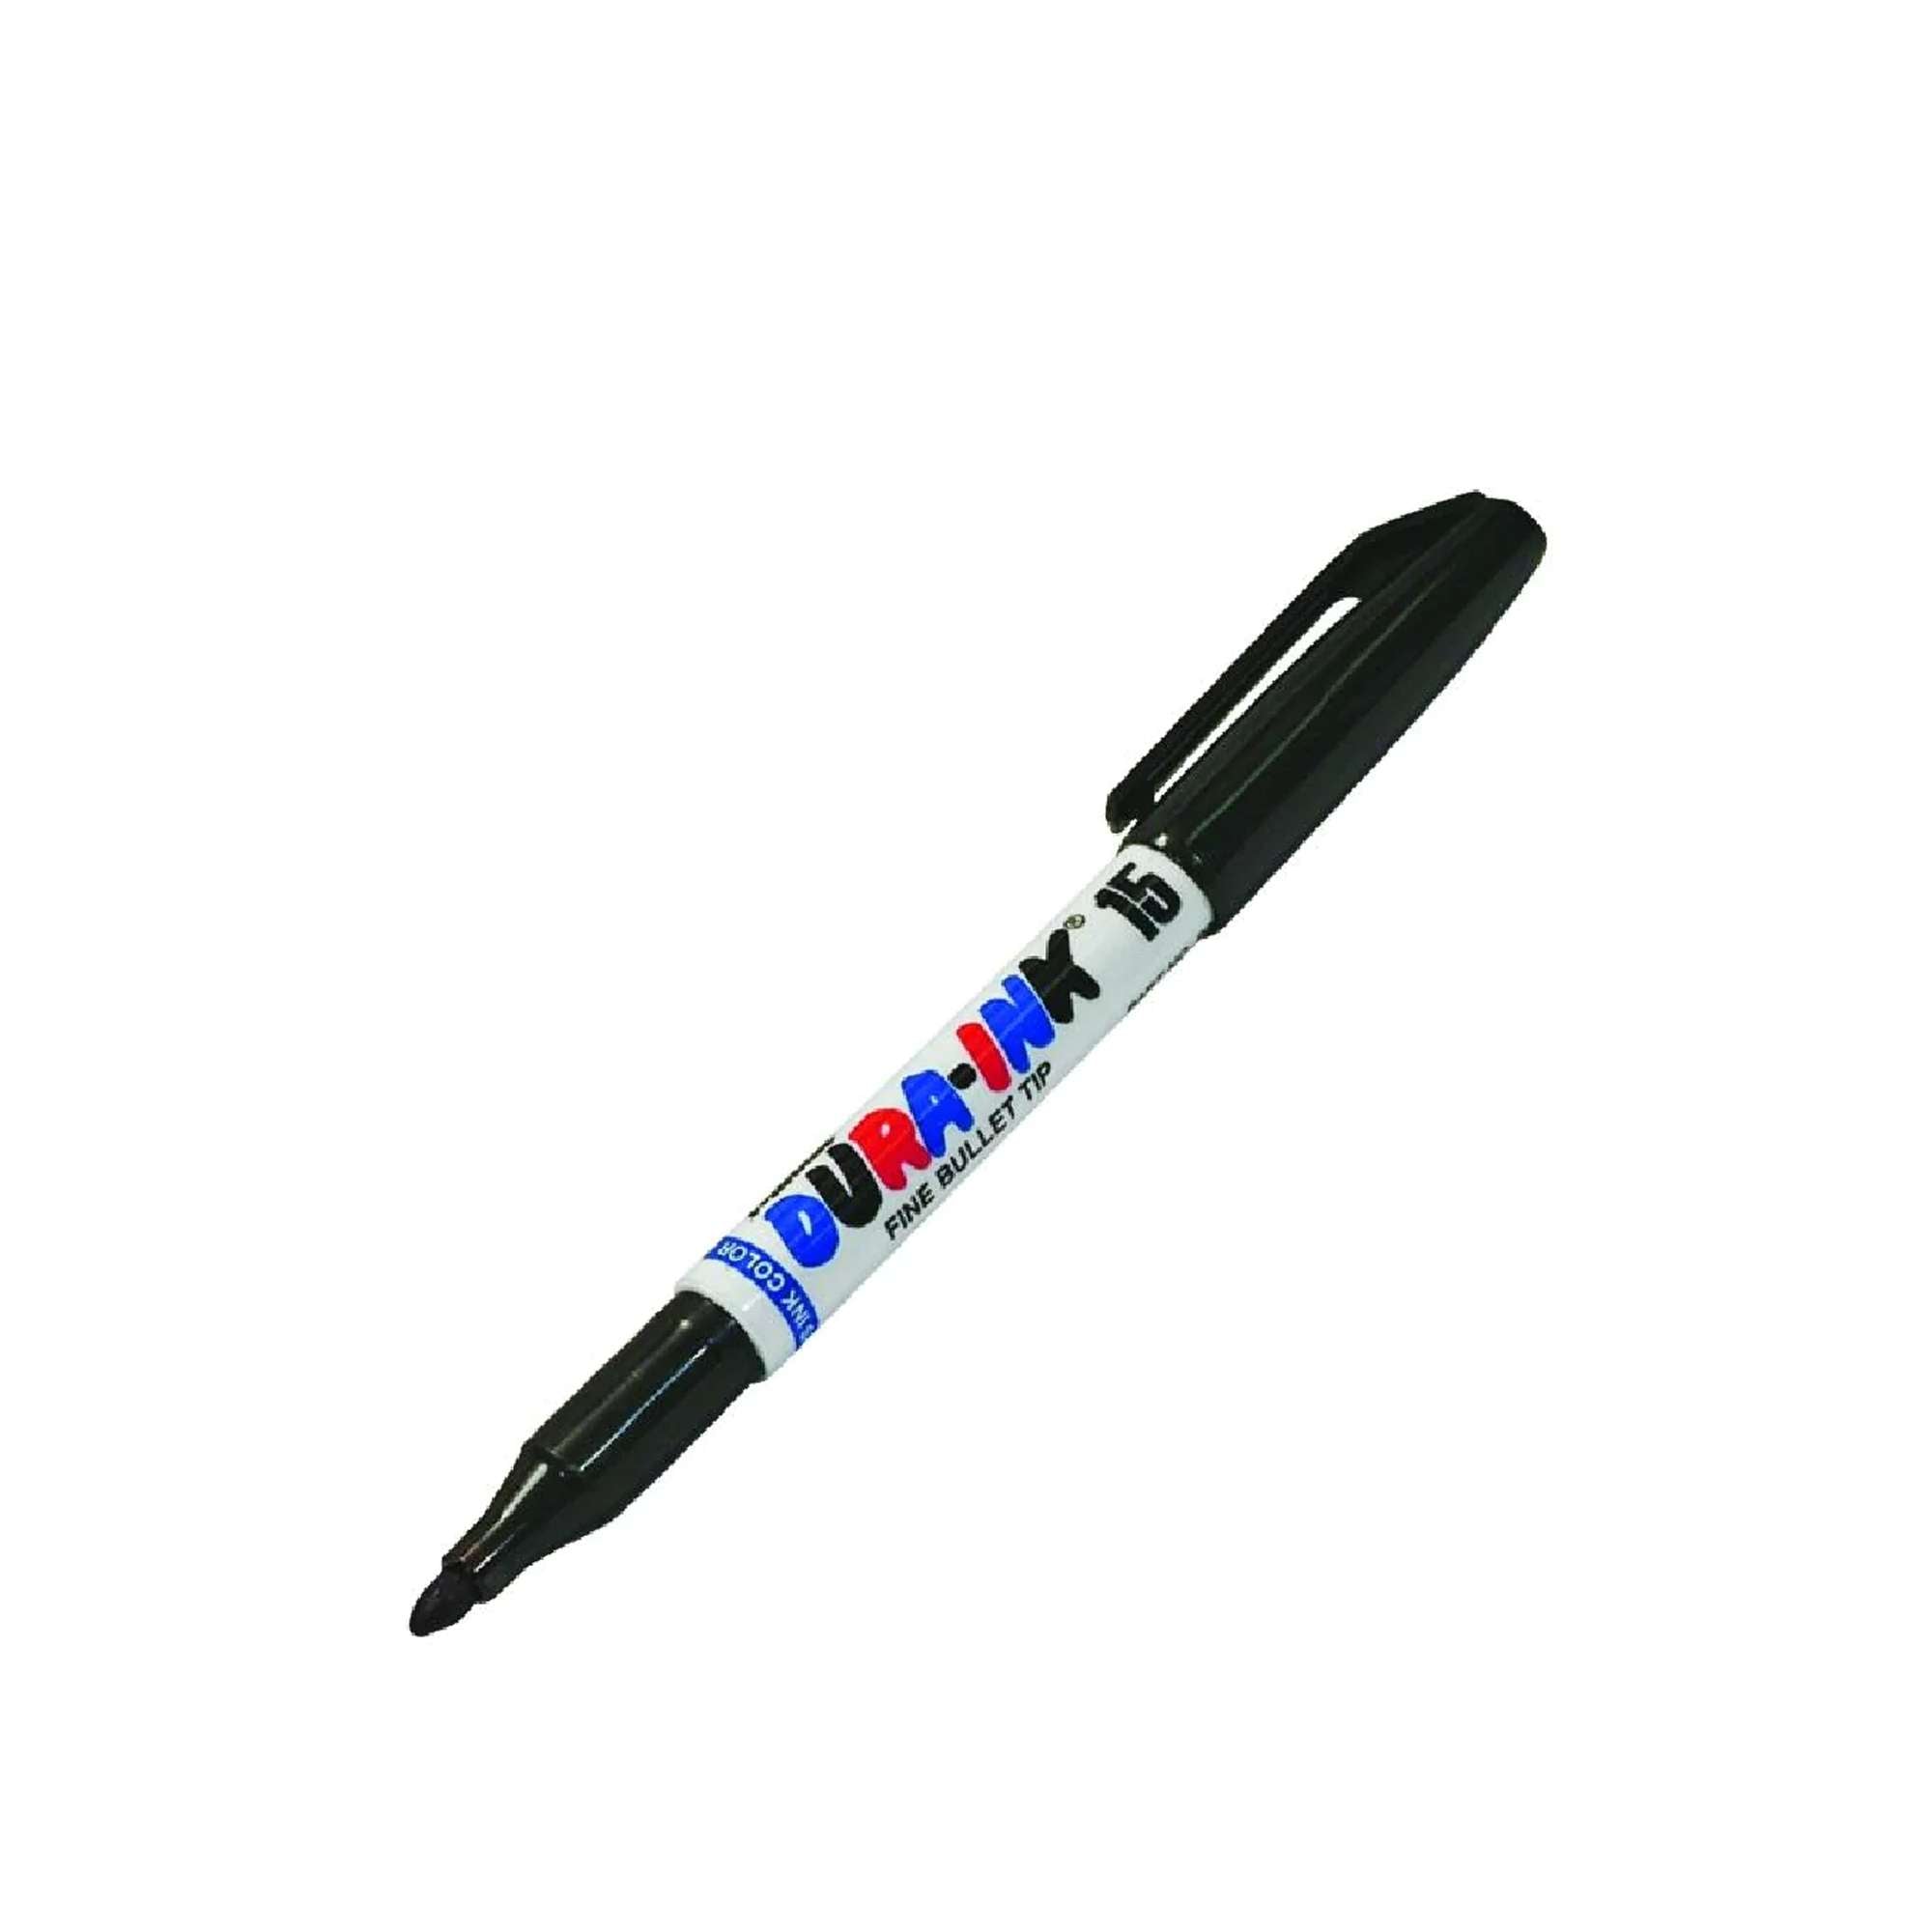 DURA-INK indelible marker different colors - 12pcs Metrica